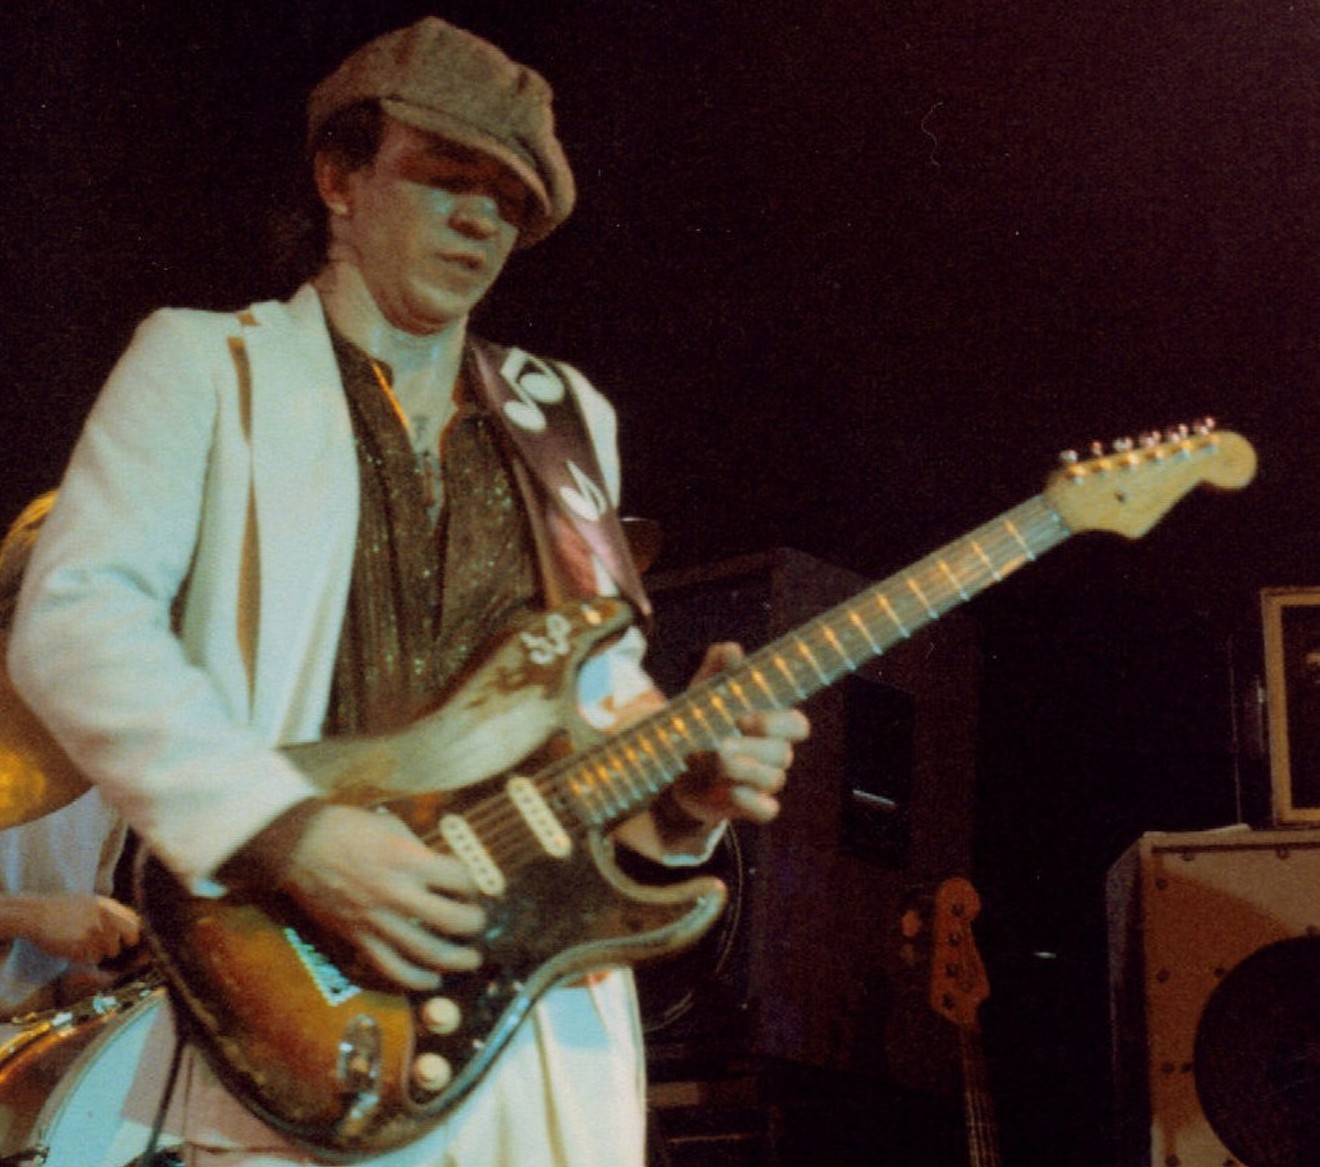 The late Stevie Ray Vaughan playing in Austin in 1983.